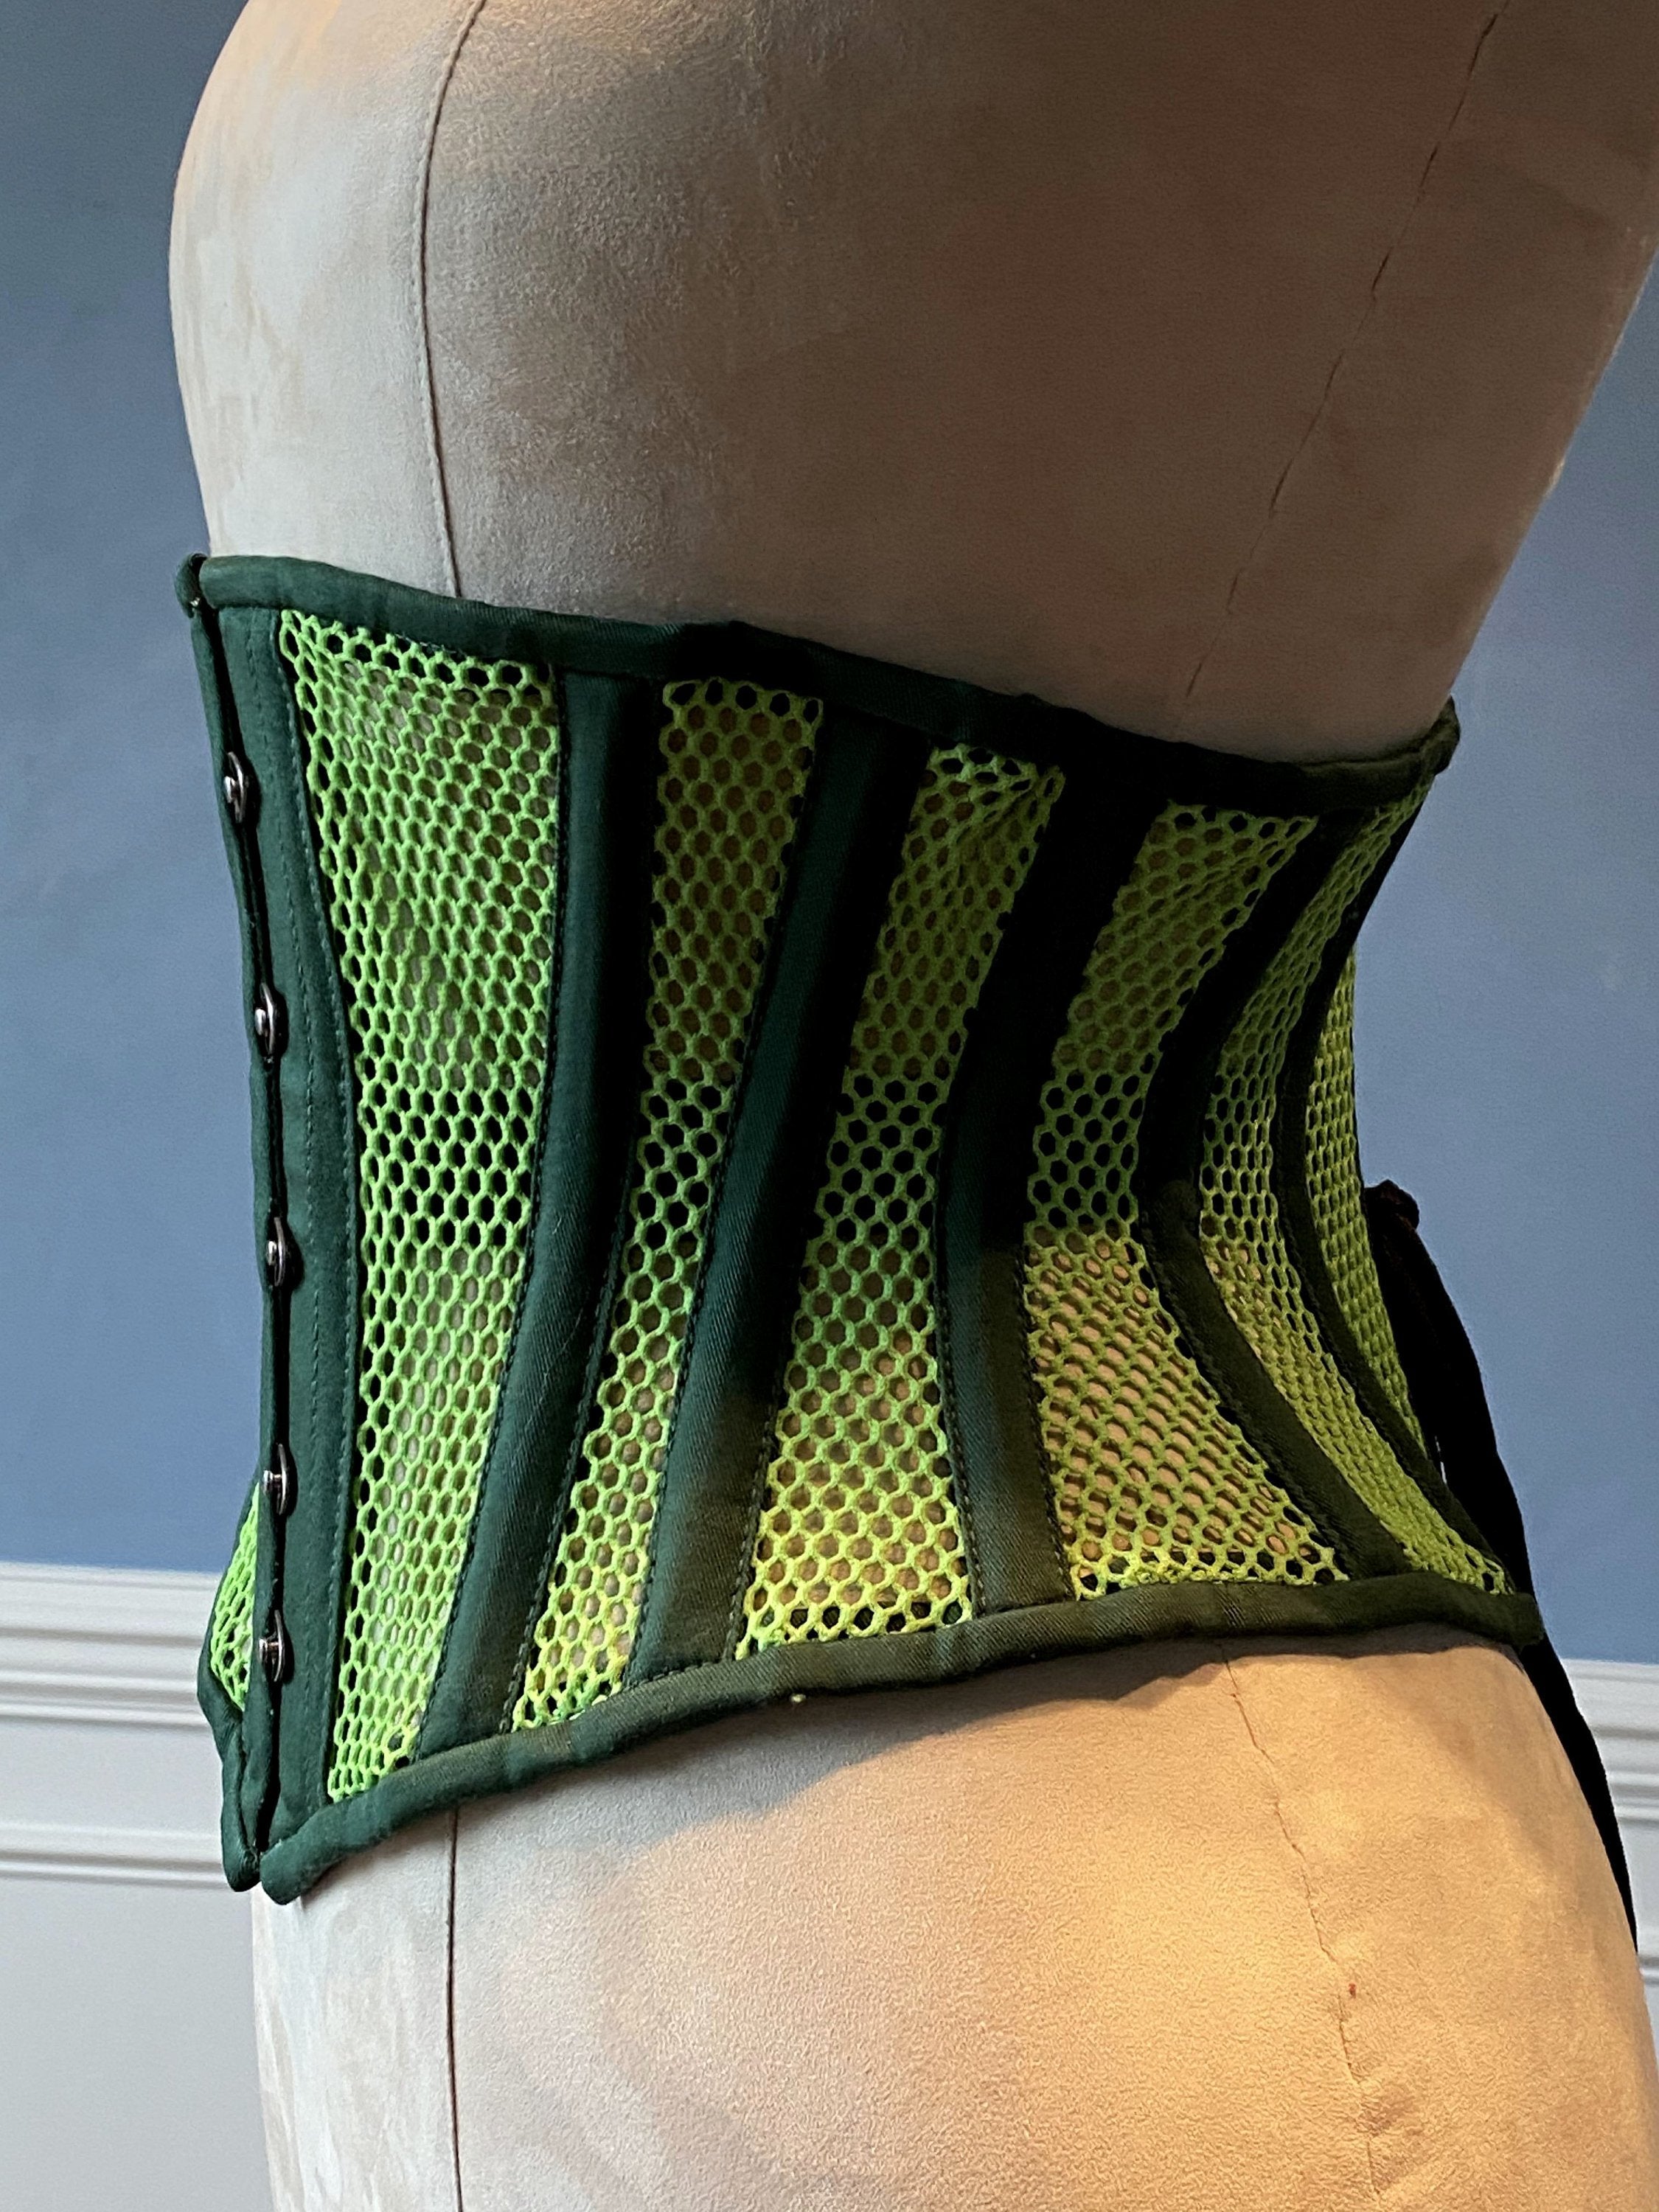 Real steel boned underbust underwear green corset from transparent mesh and  cotton. Real waist training corset for tight lacing.